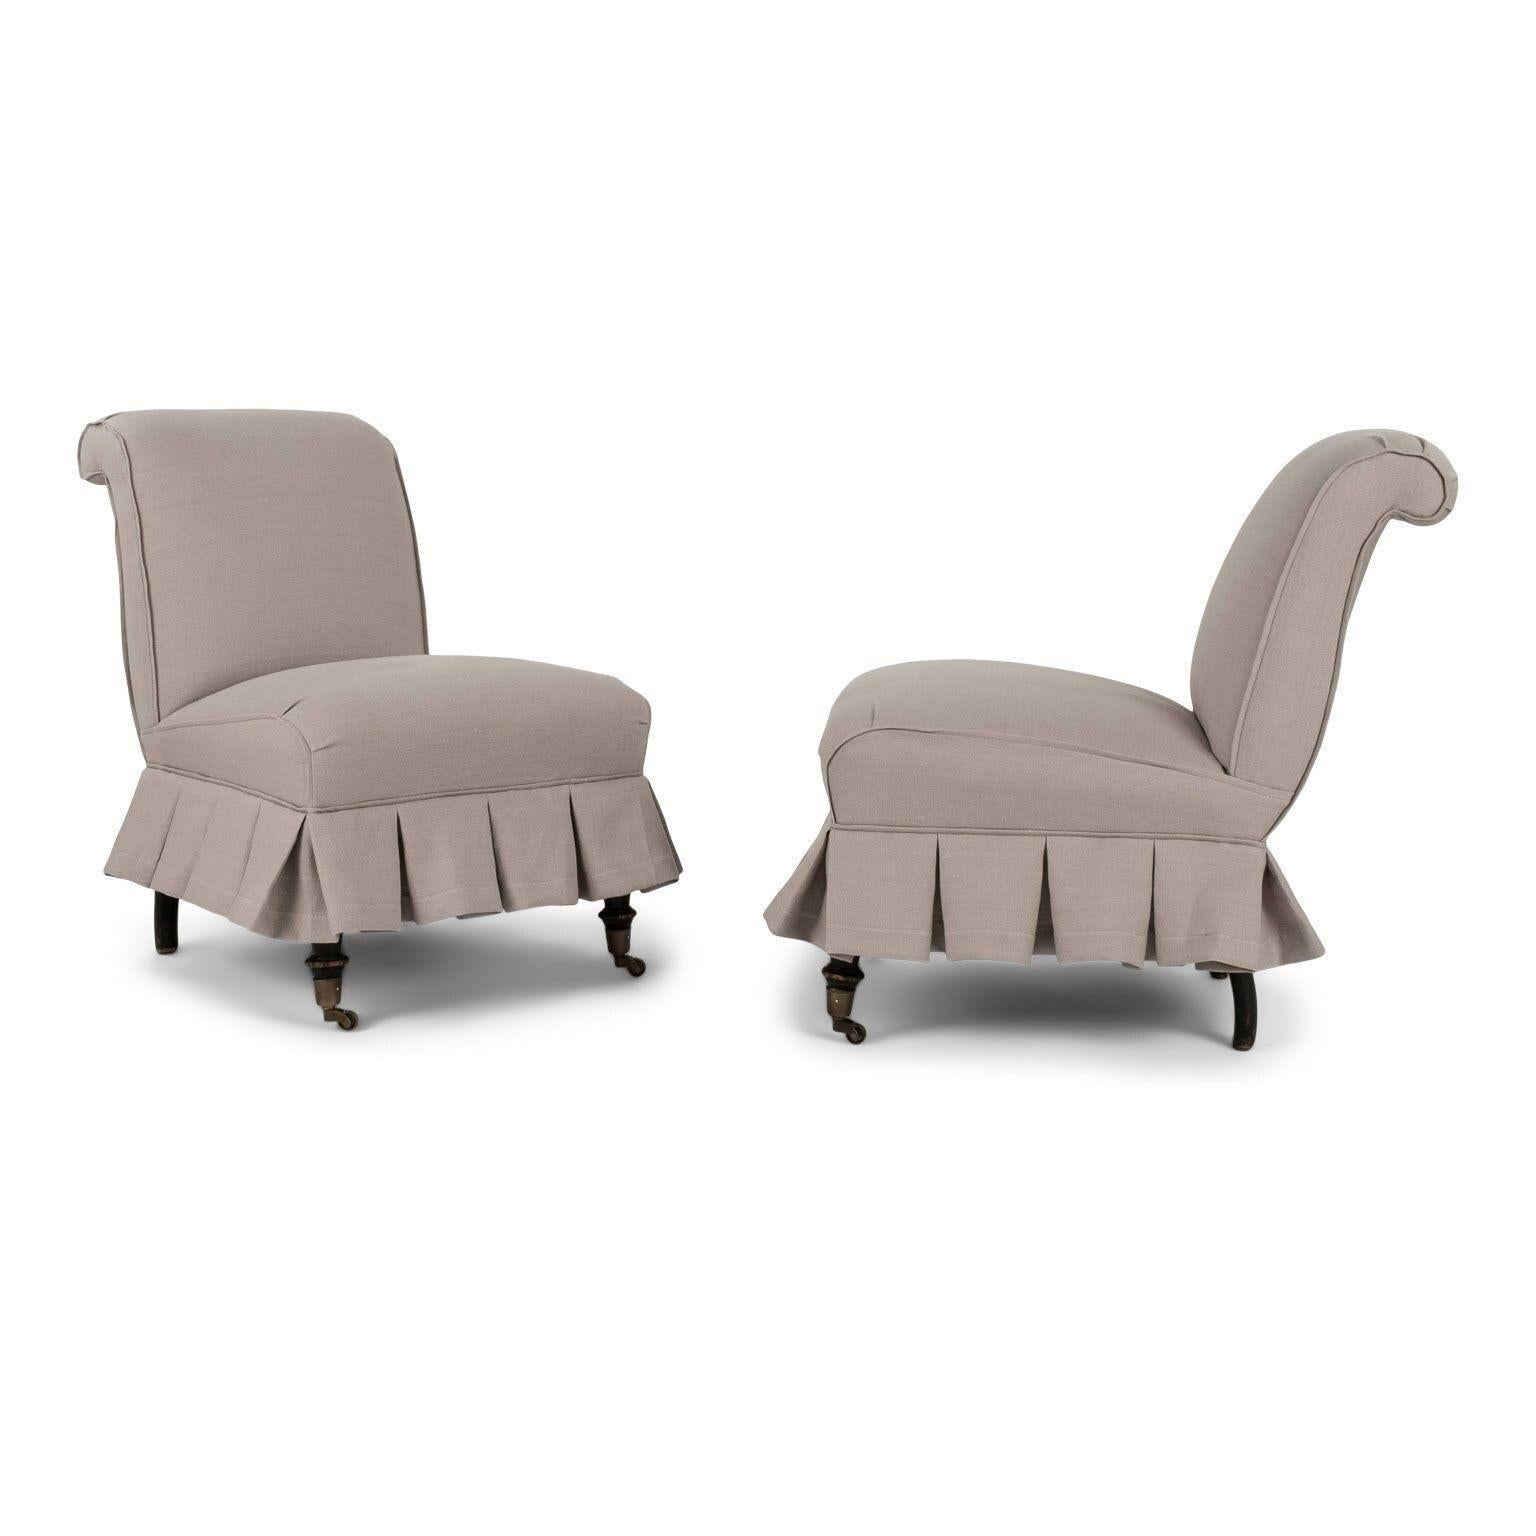 Pair of French Napoleon III Slipper Chairs in Lavender Linen 1